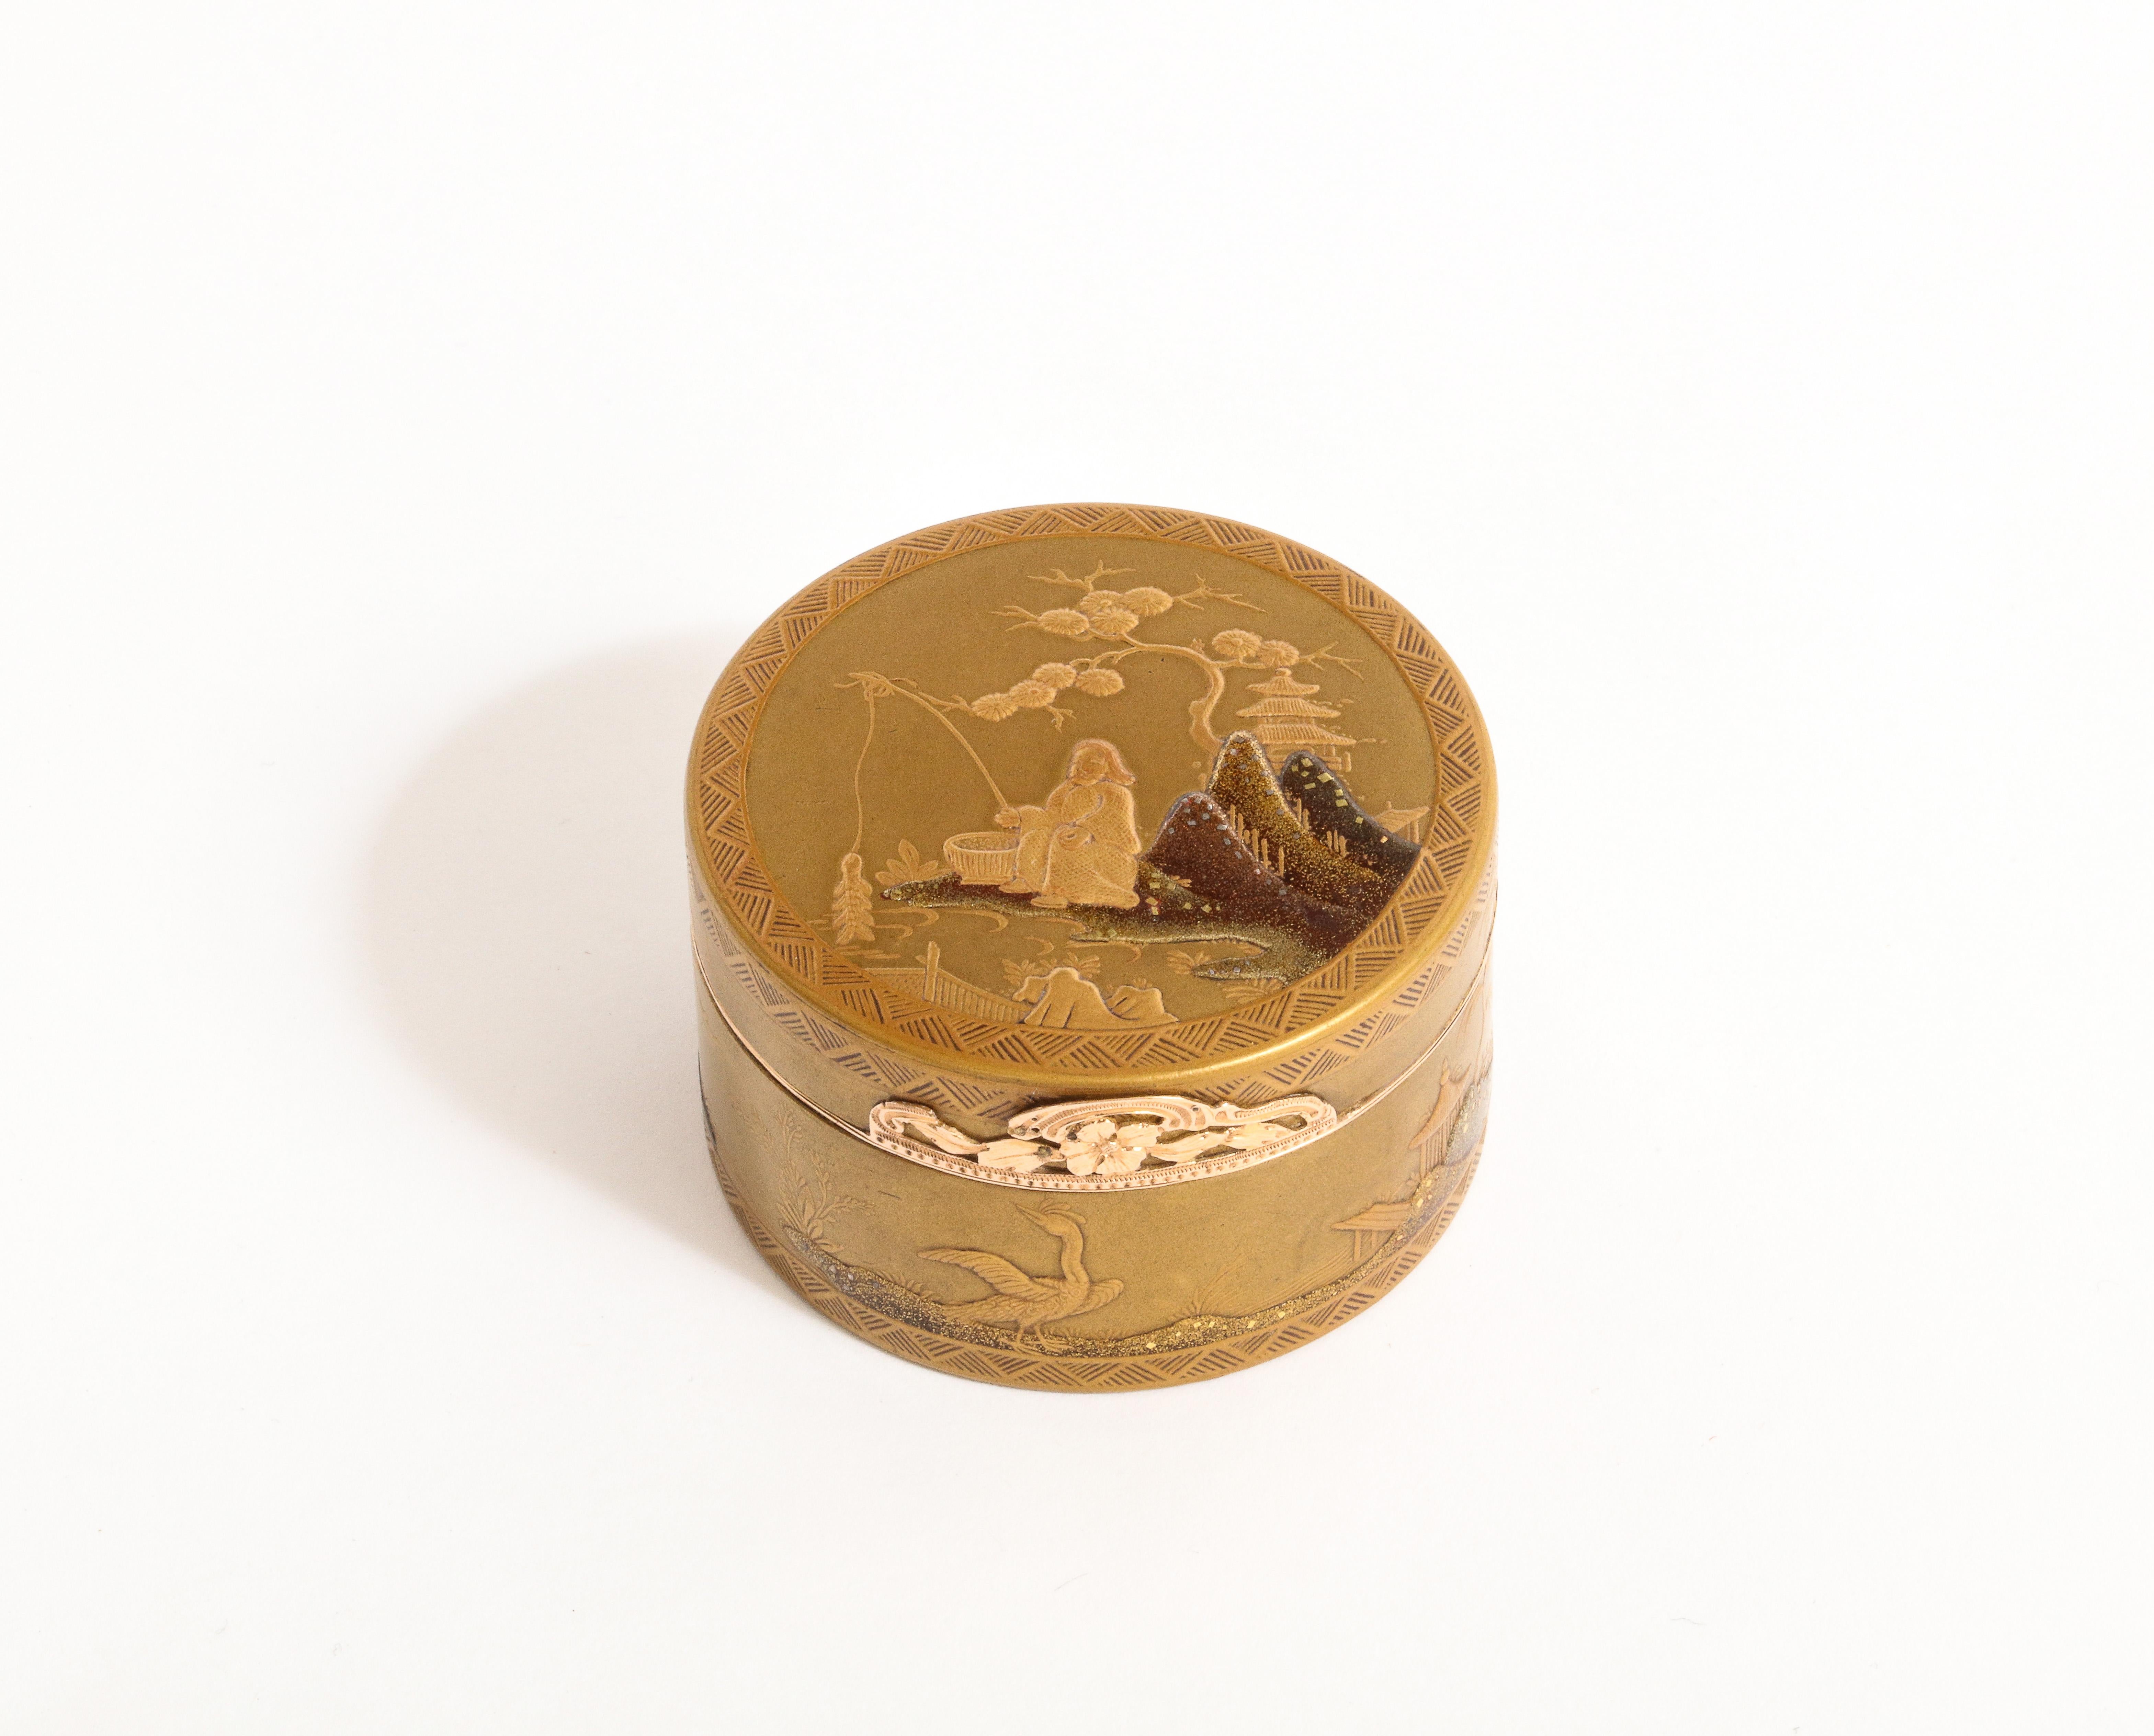 Louis XV gold & lacquer snuff box
Circa Paris, France 1760/1761
With the Charge and Decharge Marks of Eloy Brichard 1756 - 1762
Circular Gold-lined box of gold-colored lacquer with wavy flange and pierced foliate thumbpiece , the cover, sides and